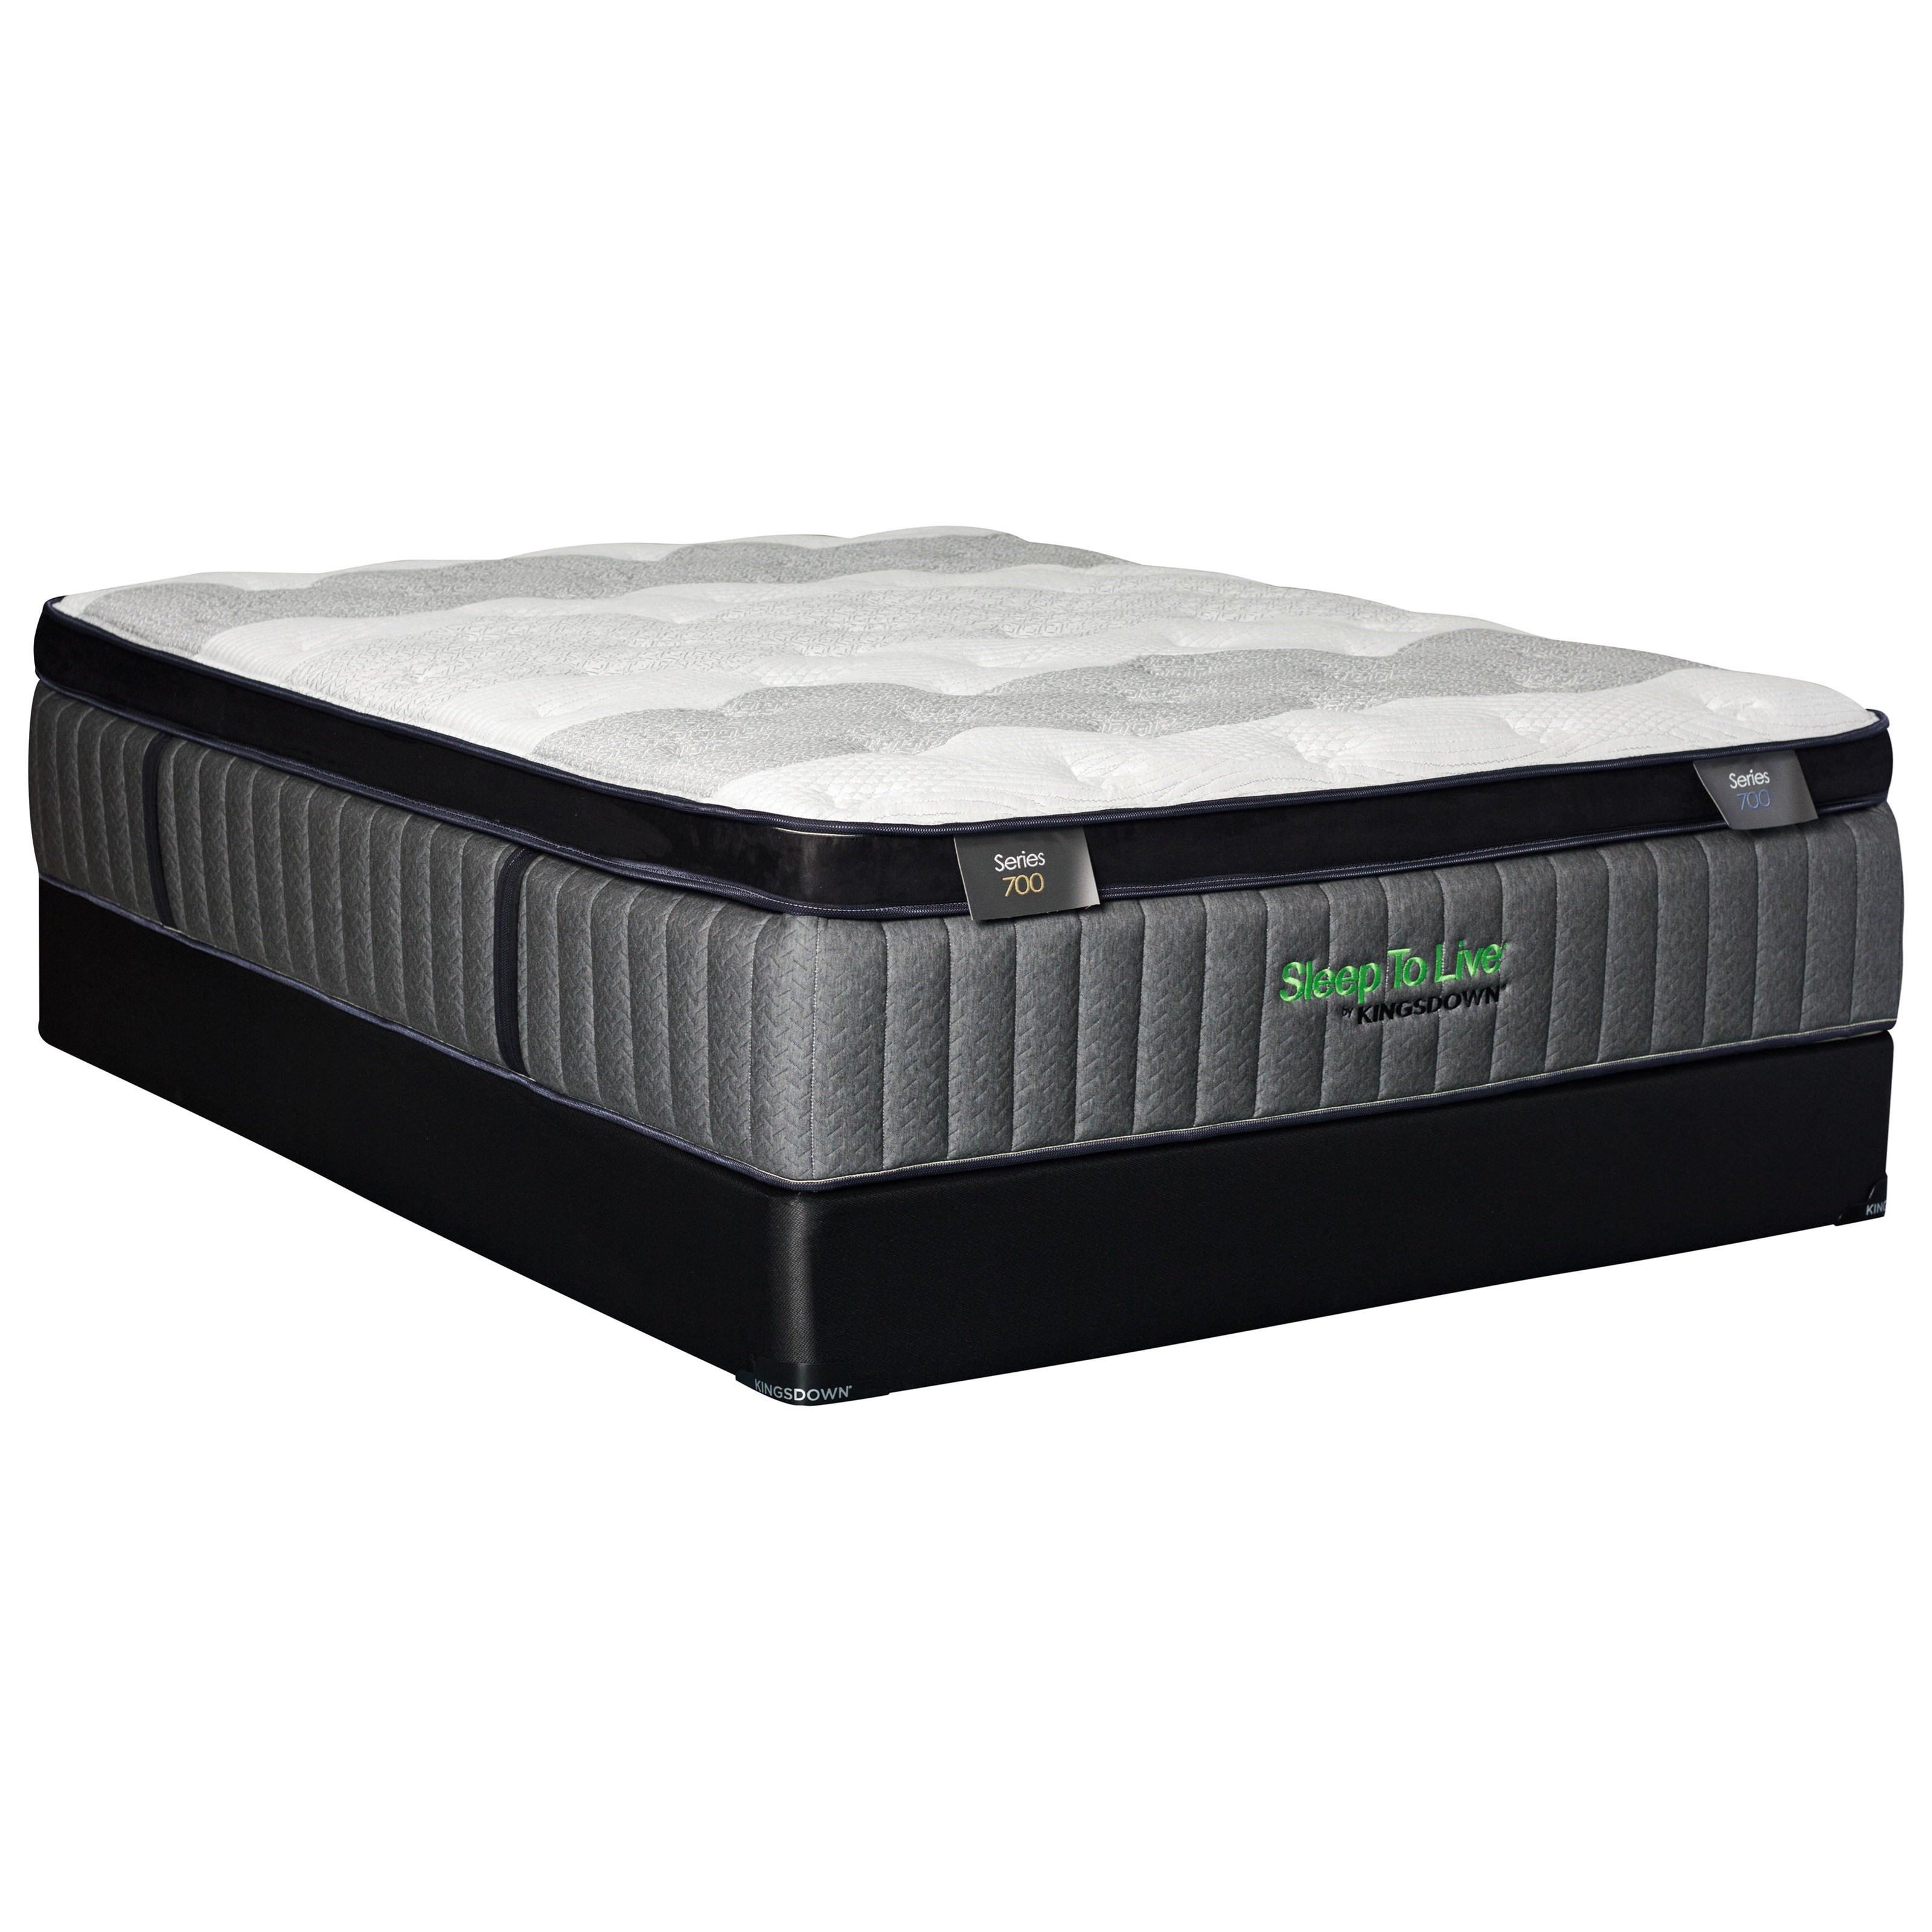 Queen Back Smart Series 700 Mattress and 5" Low Profile Box Spring